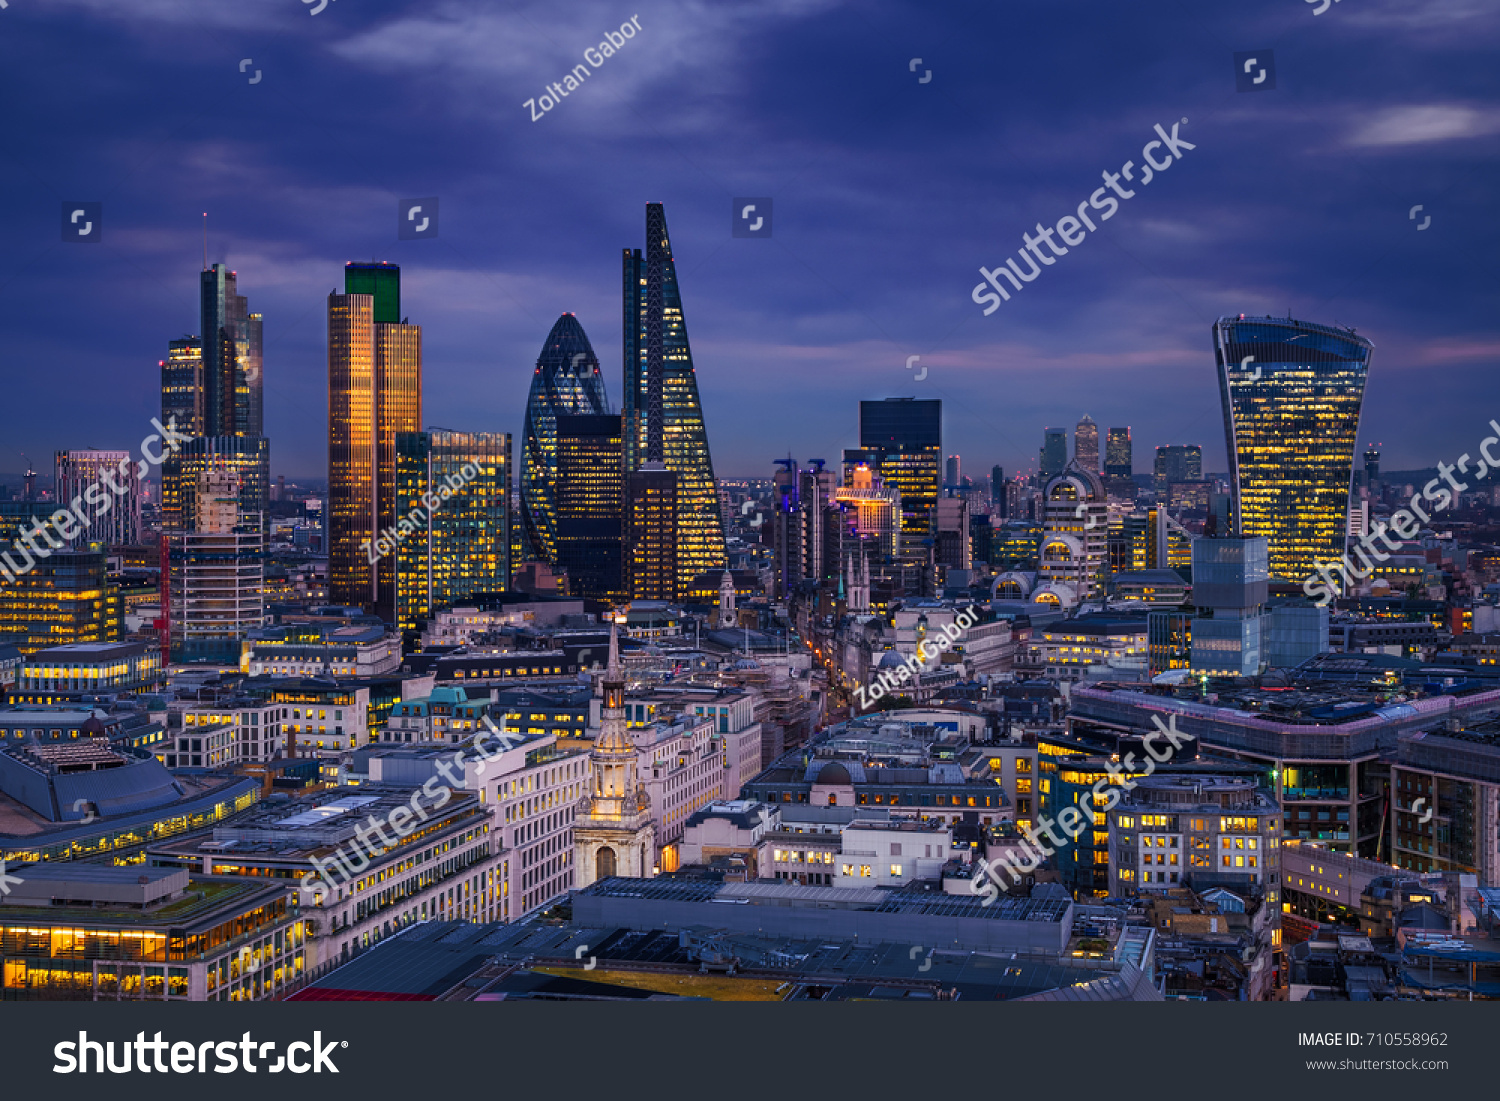 London, England - Panoramic skyline view of Bank district of London with the skyscrapers of Canary Wharf at the background at blue hour #710558962